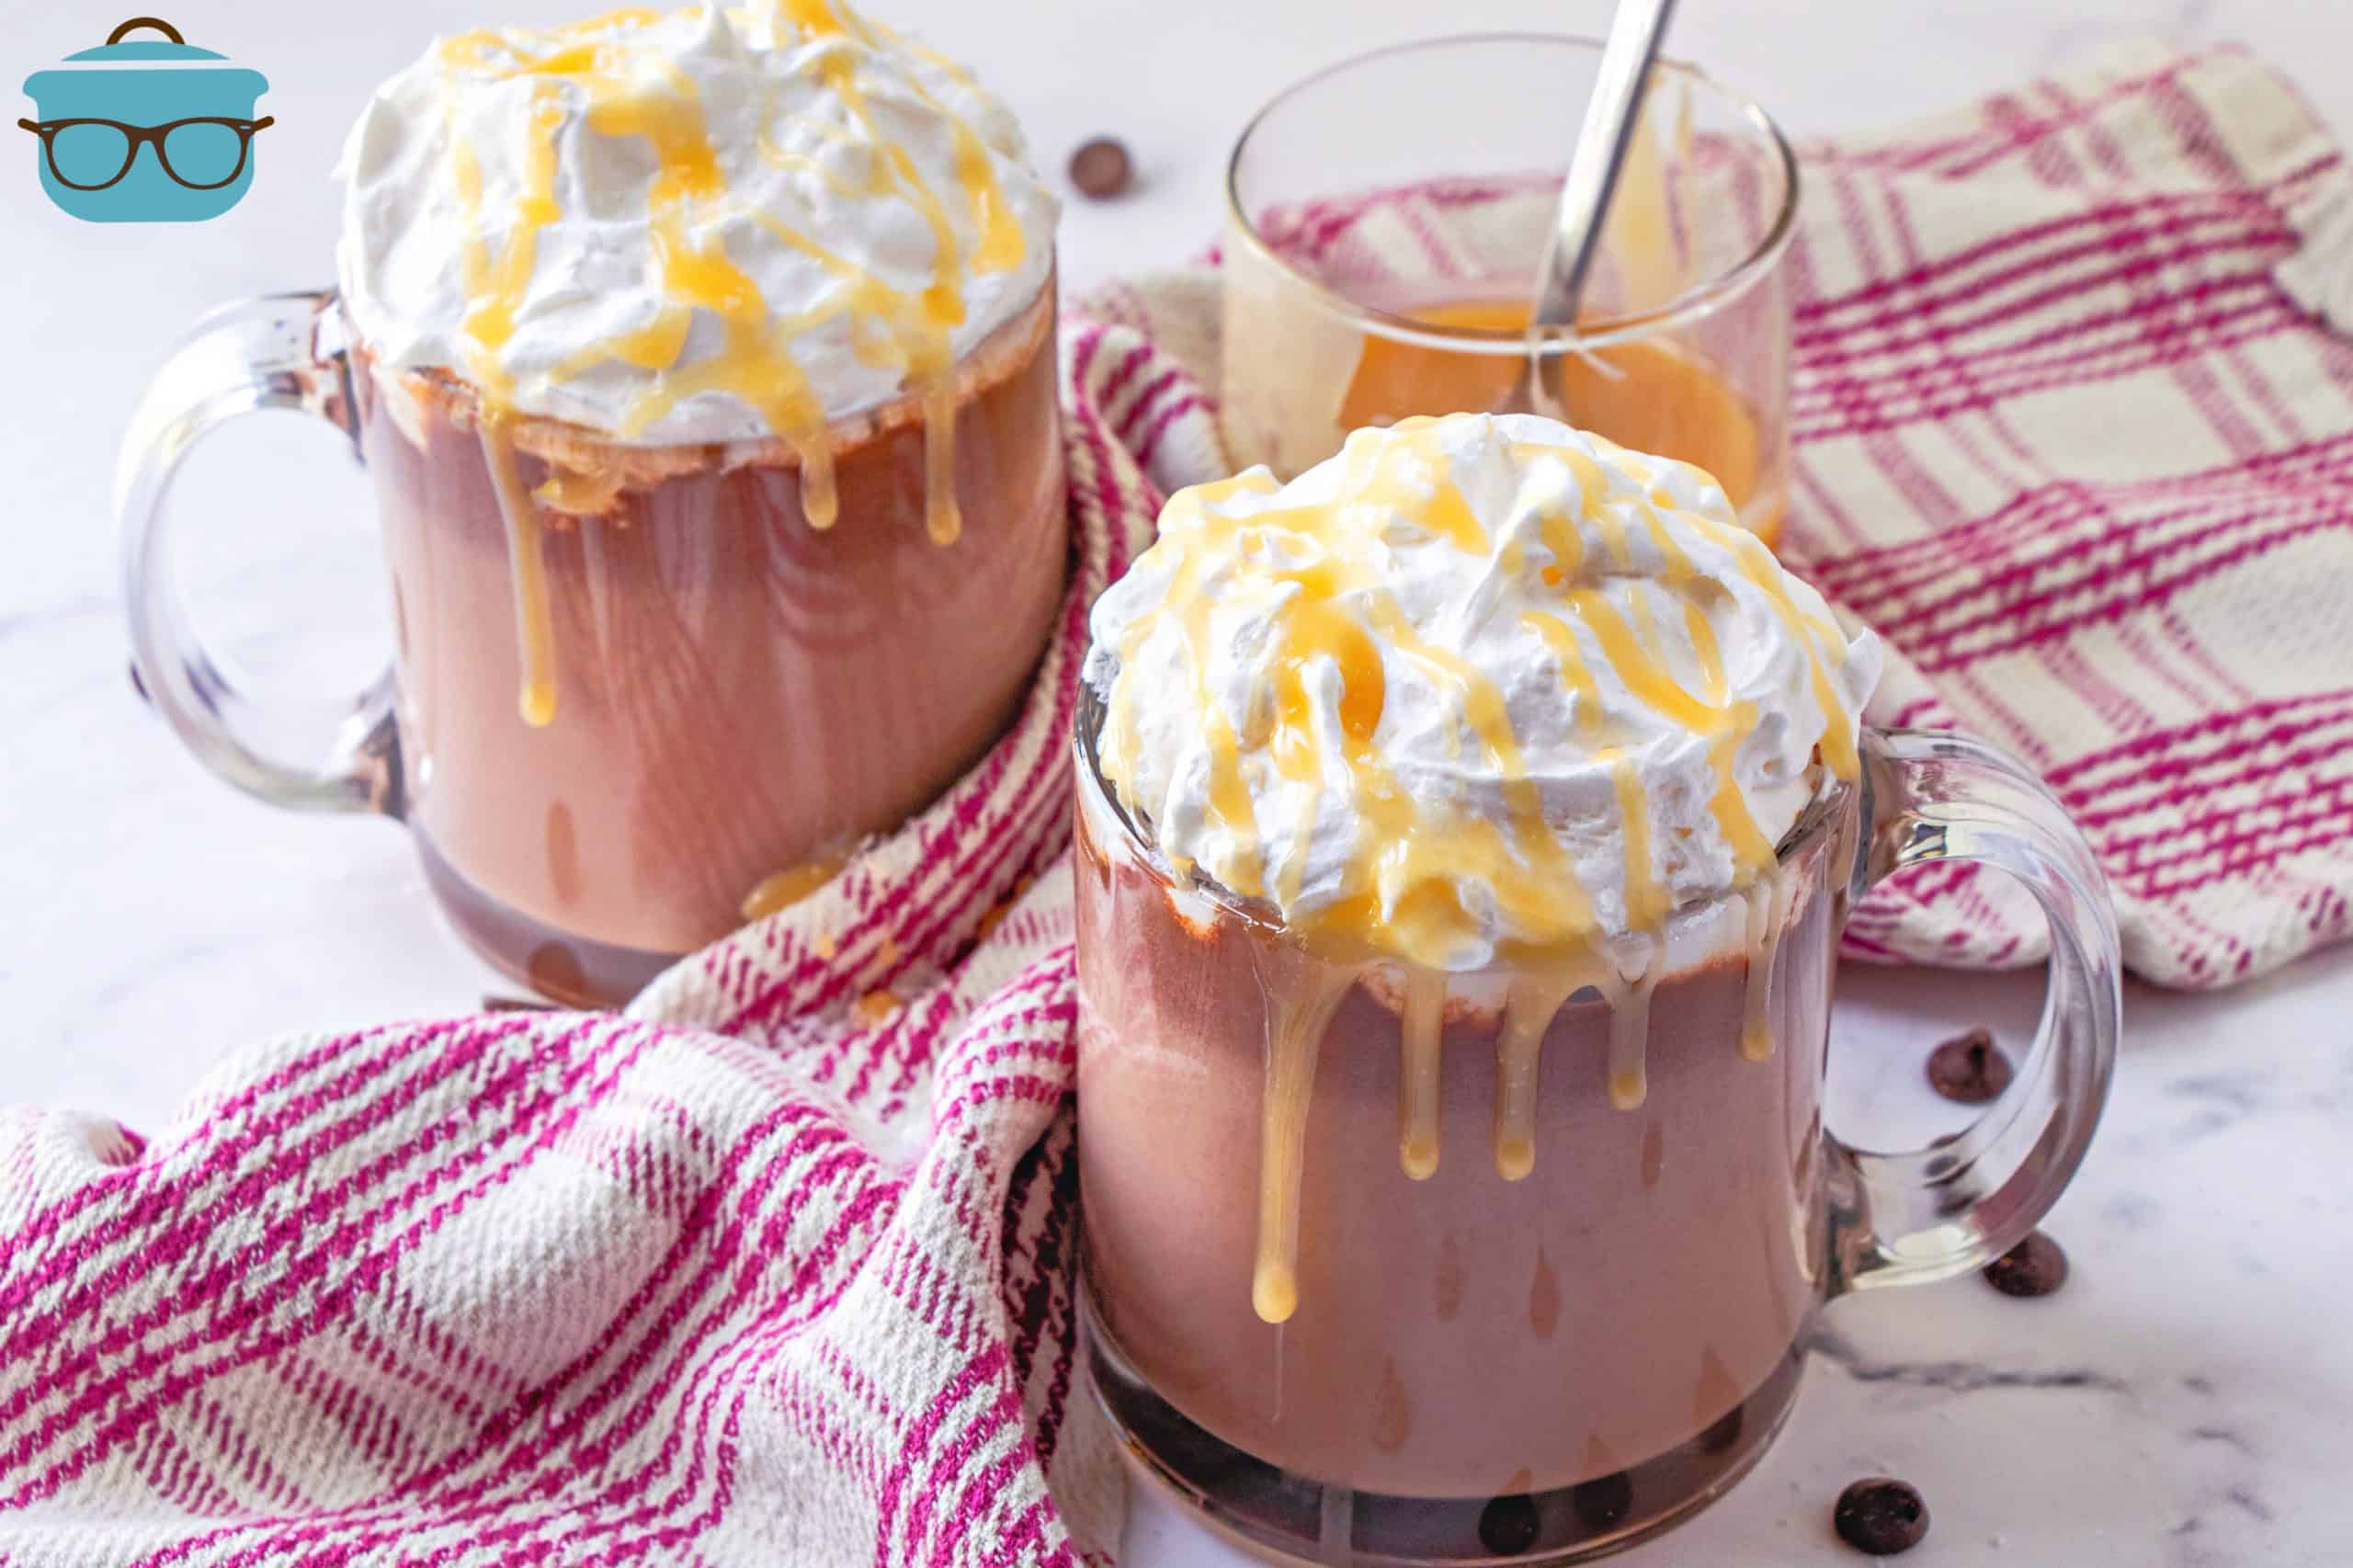 two cups of hot chocolate topped with whipped cream and drizzled with salted caramel sauce.